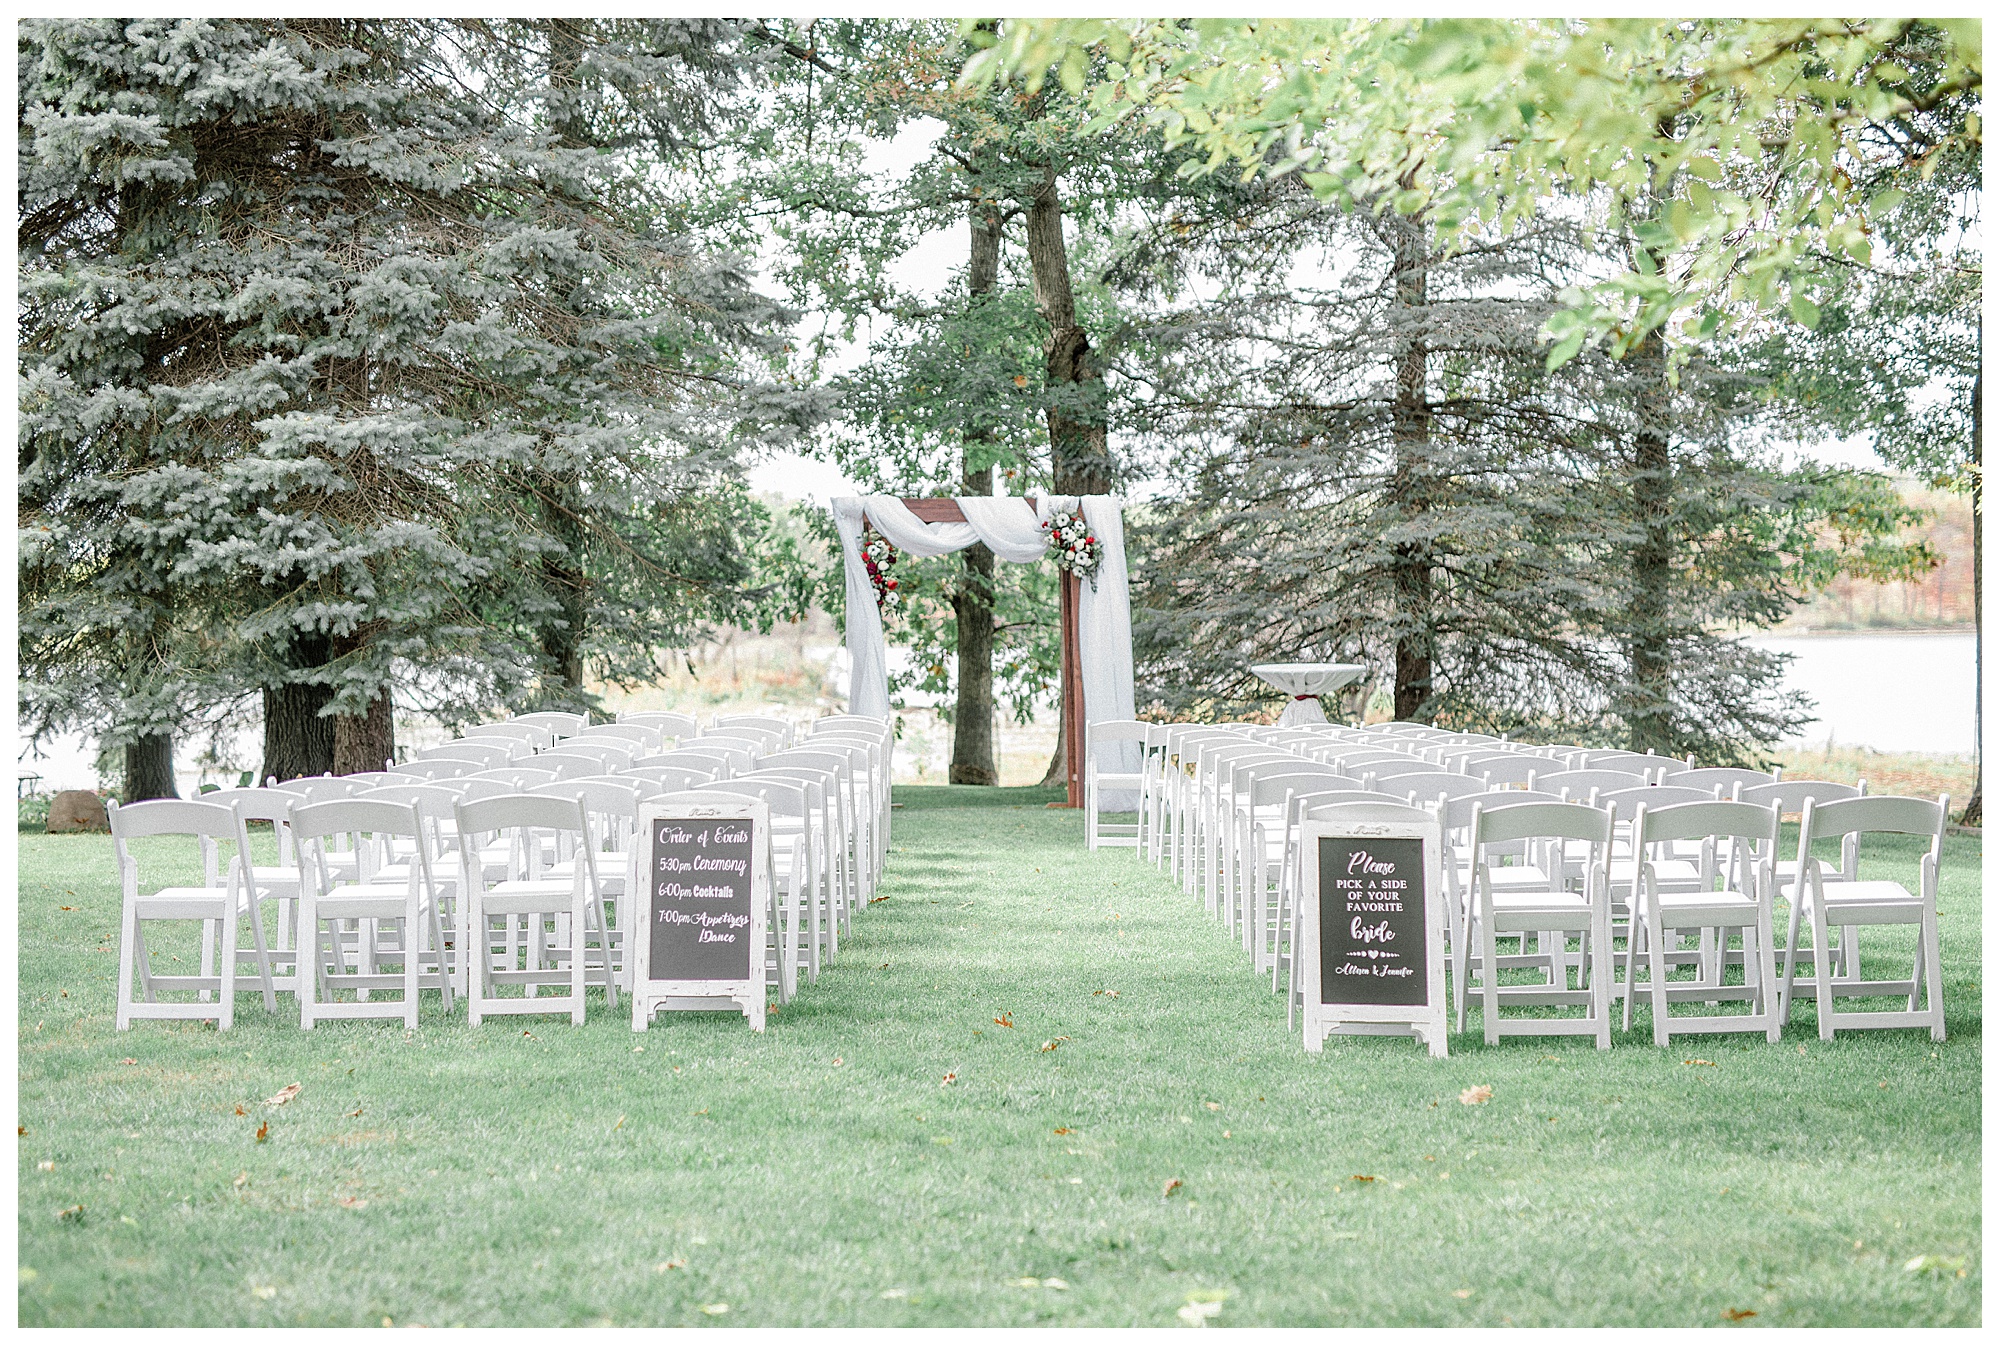 Ceremony space at a Minneapolis fall lakeside wedding. Photo by Kayla Lee.